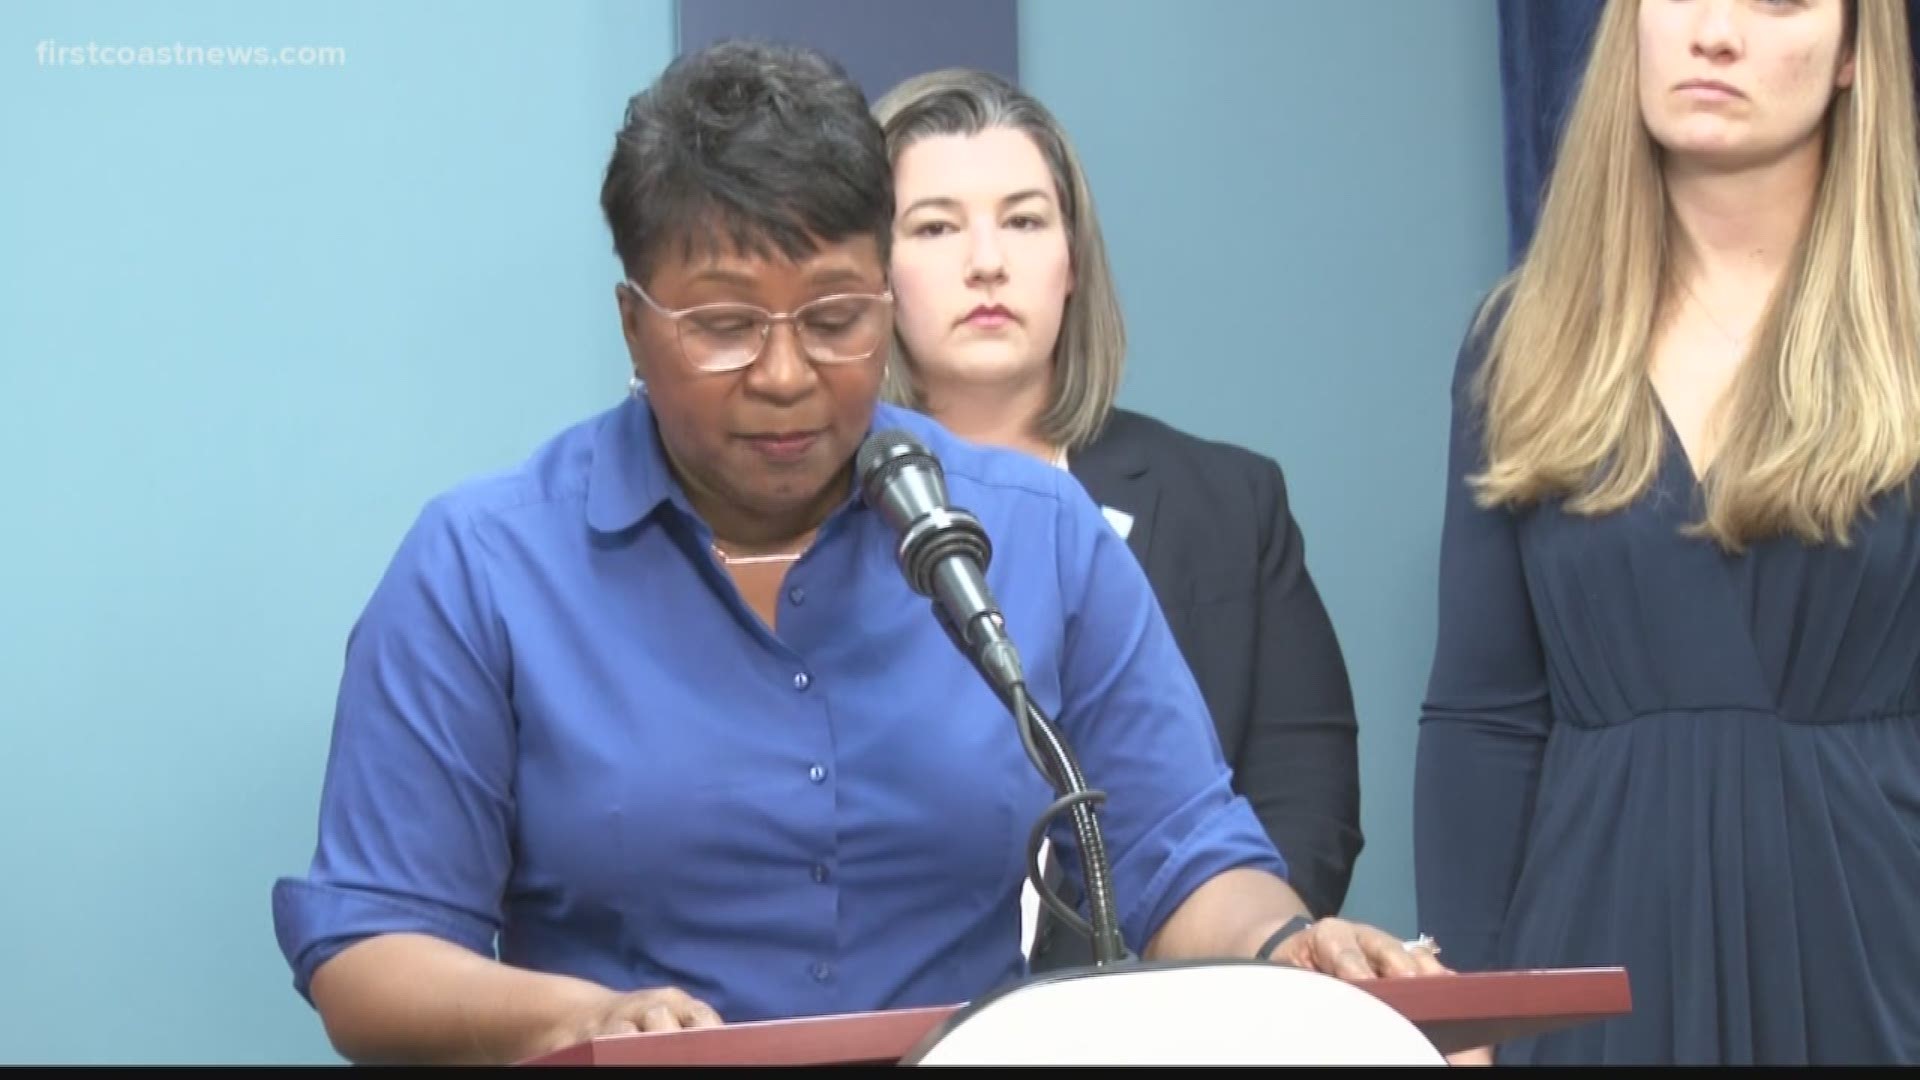 Duval County Public Schools is extending its spring break by one week, superintendent Dr. Diana Greene announced in a media conference Friday afternoon.